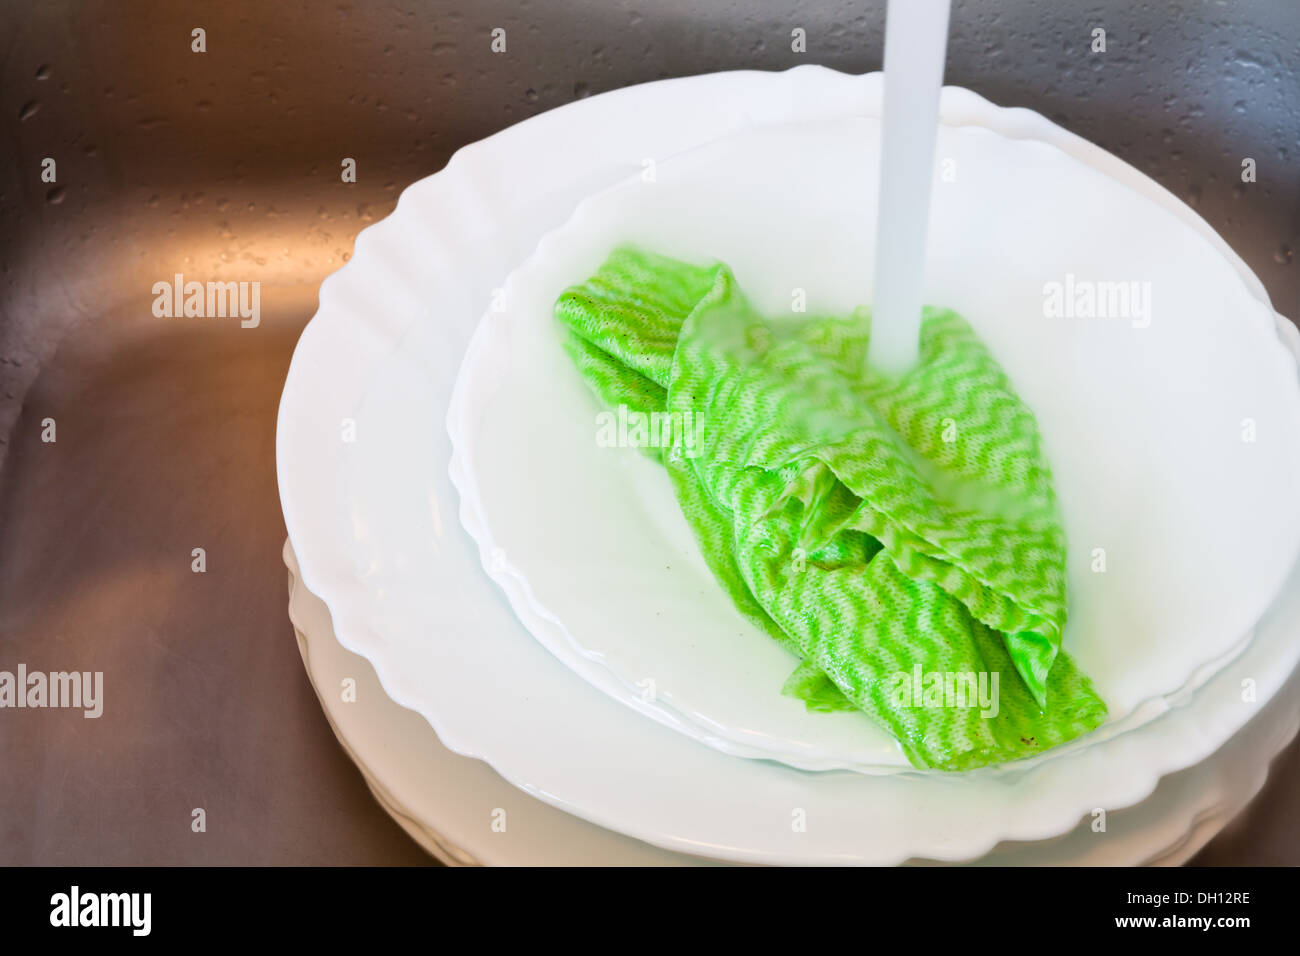 washing-up by dishcloth in metal washbasin in kitchen Stock Photo